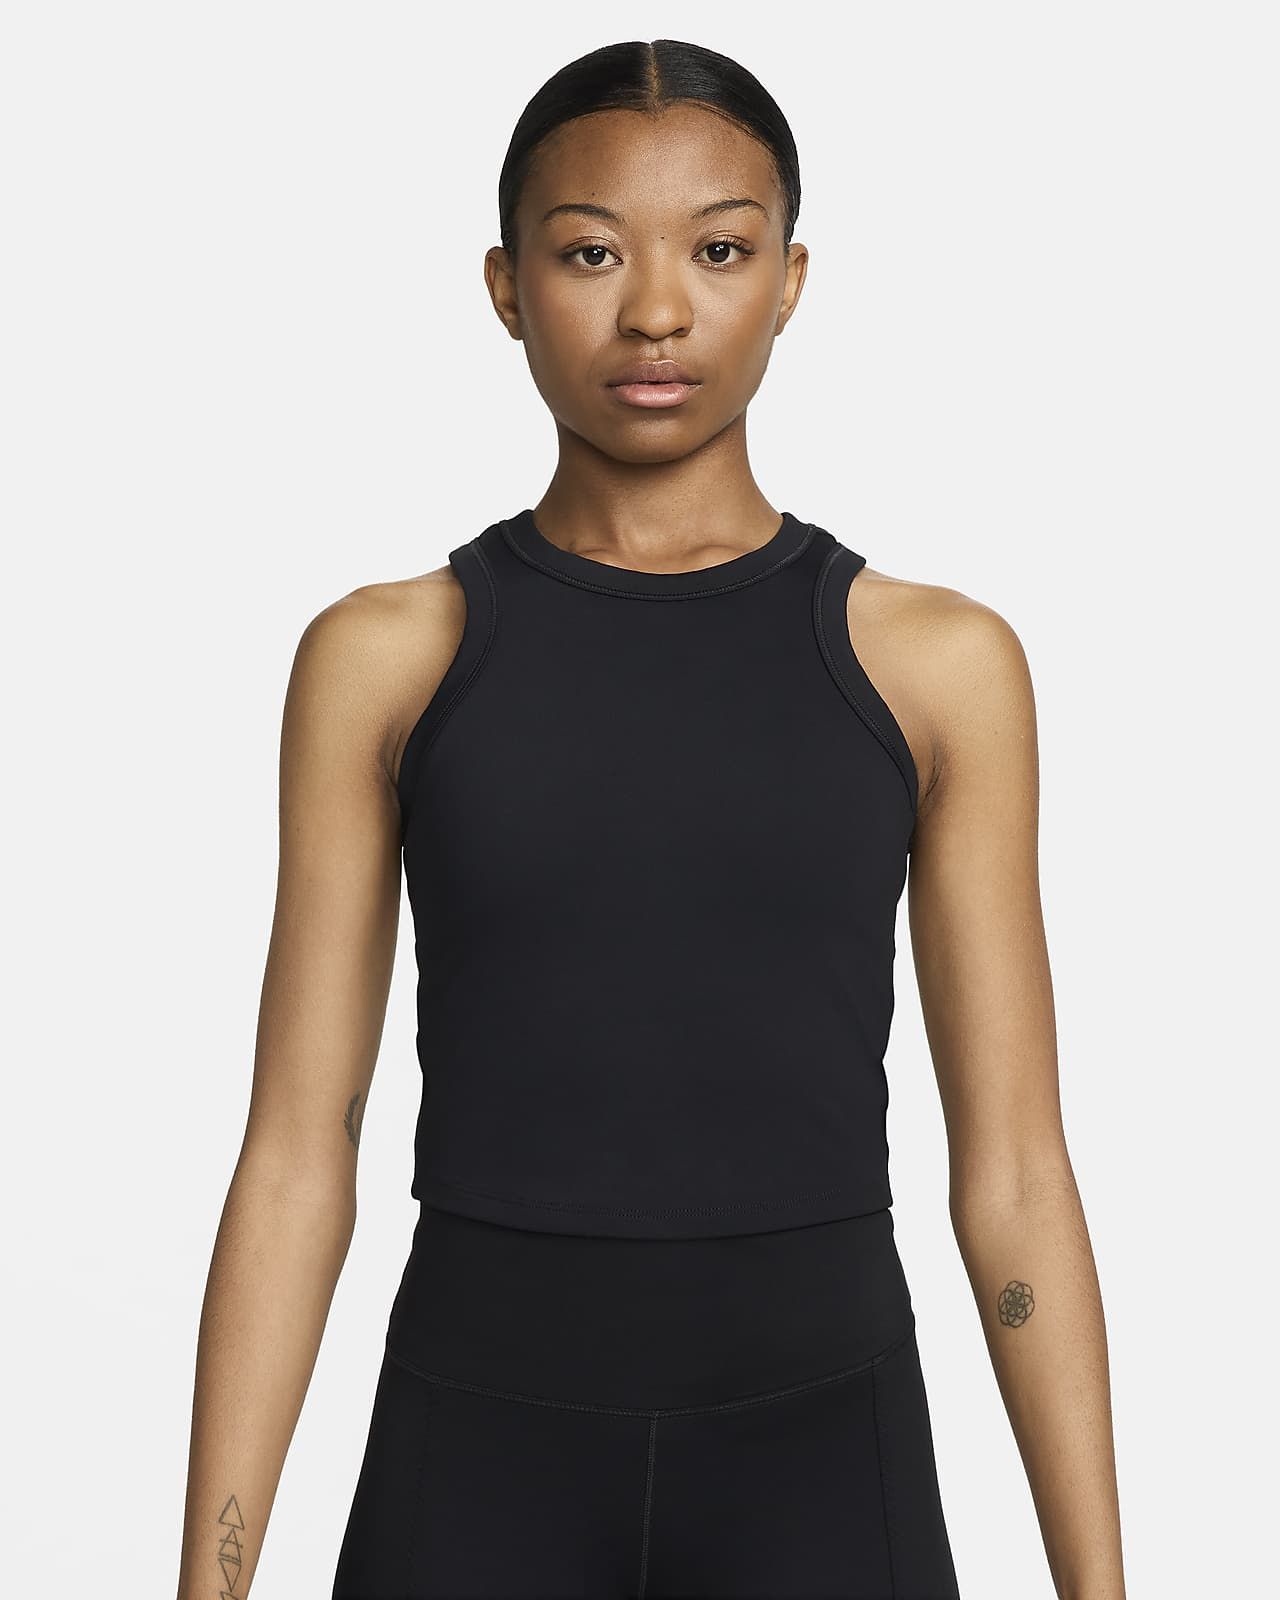 Nike One Fitted Women's Dri-FIT Cropped Tank Top. Nike.com | Nike (US)